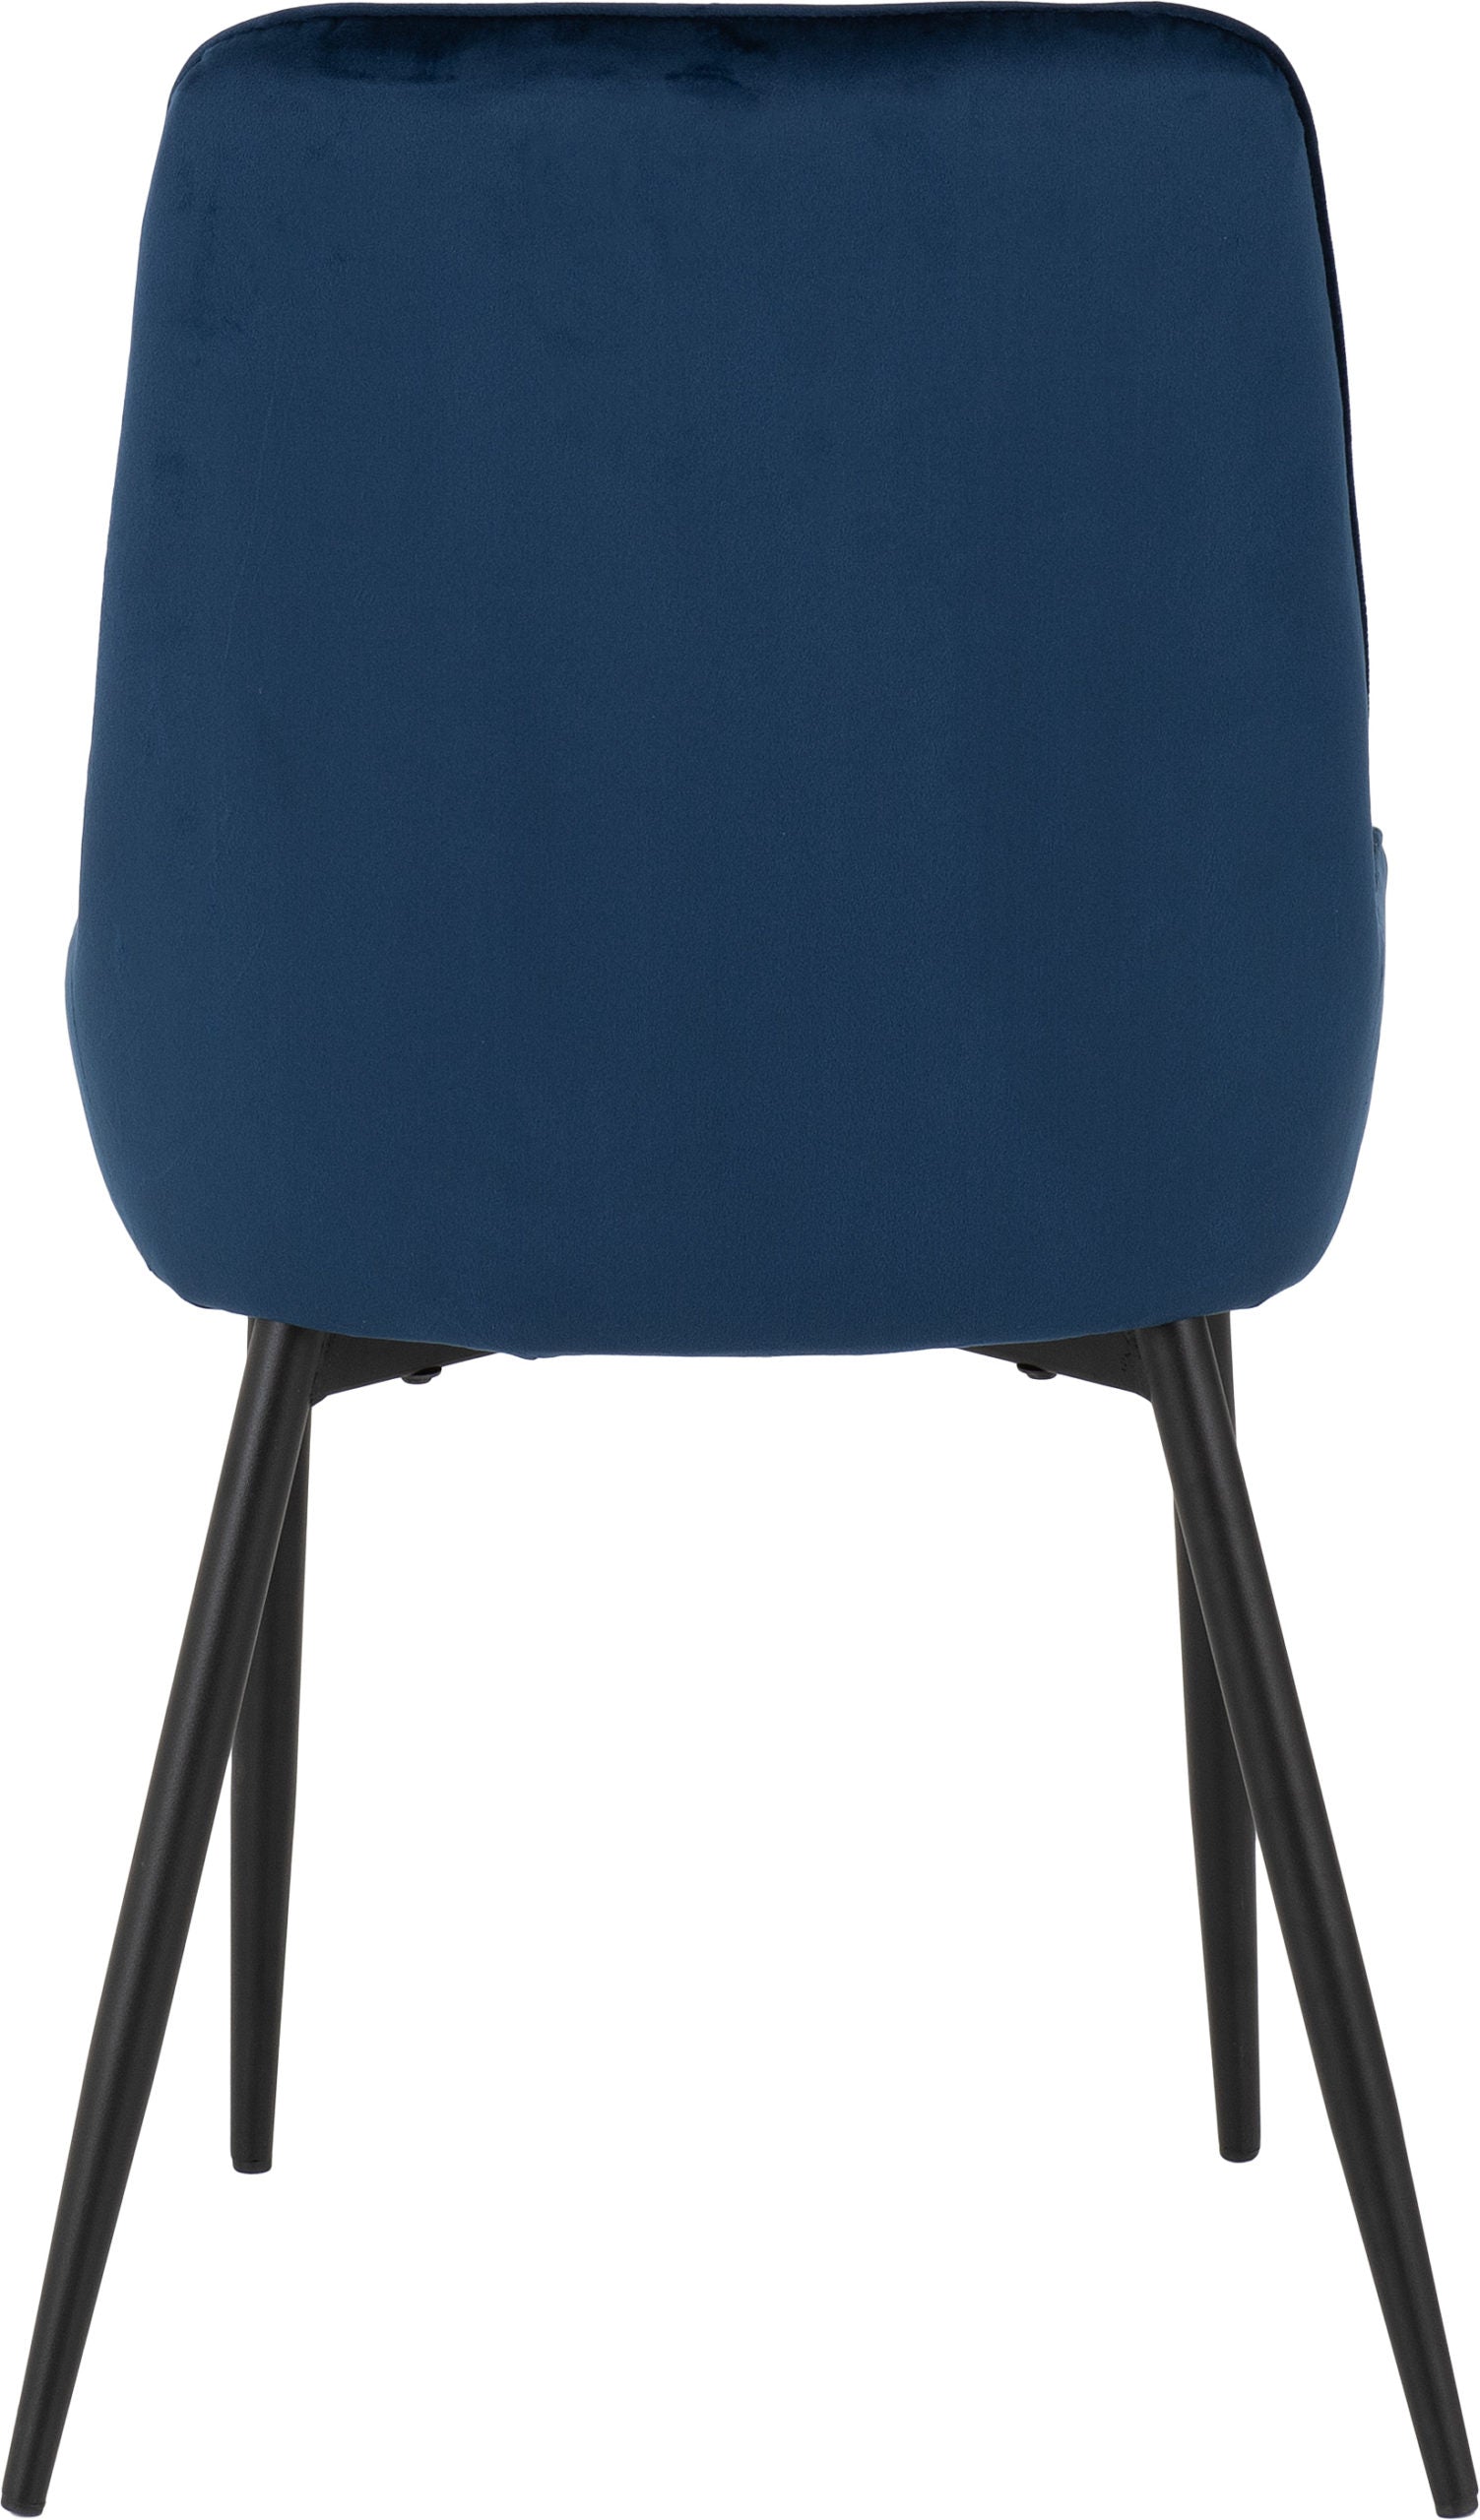 Avery Chairs Sapphire Blue Velvet - The Right Buy Store